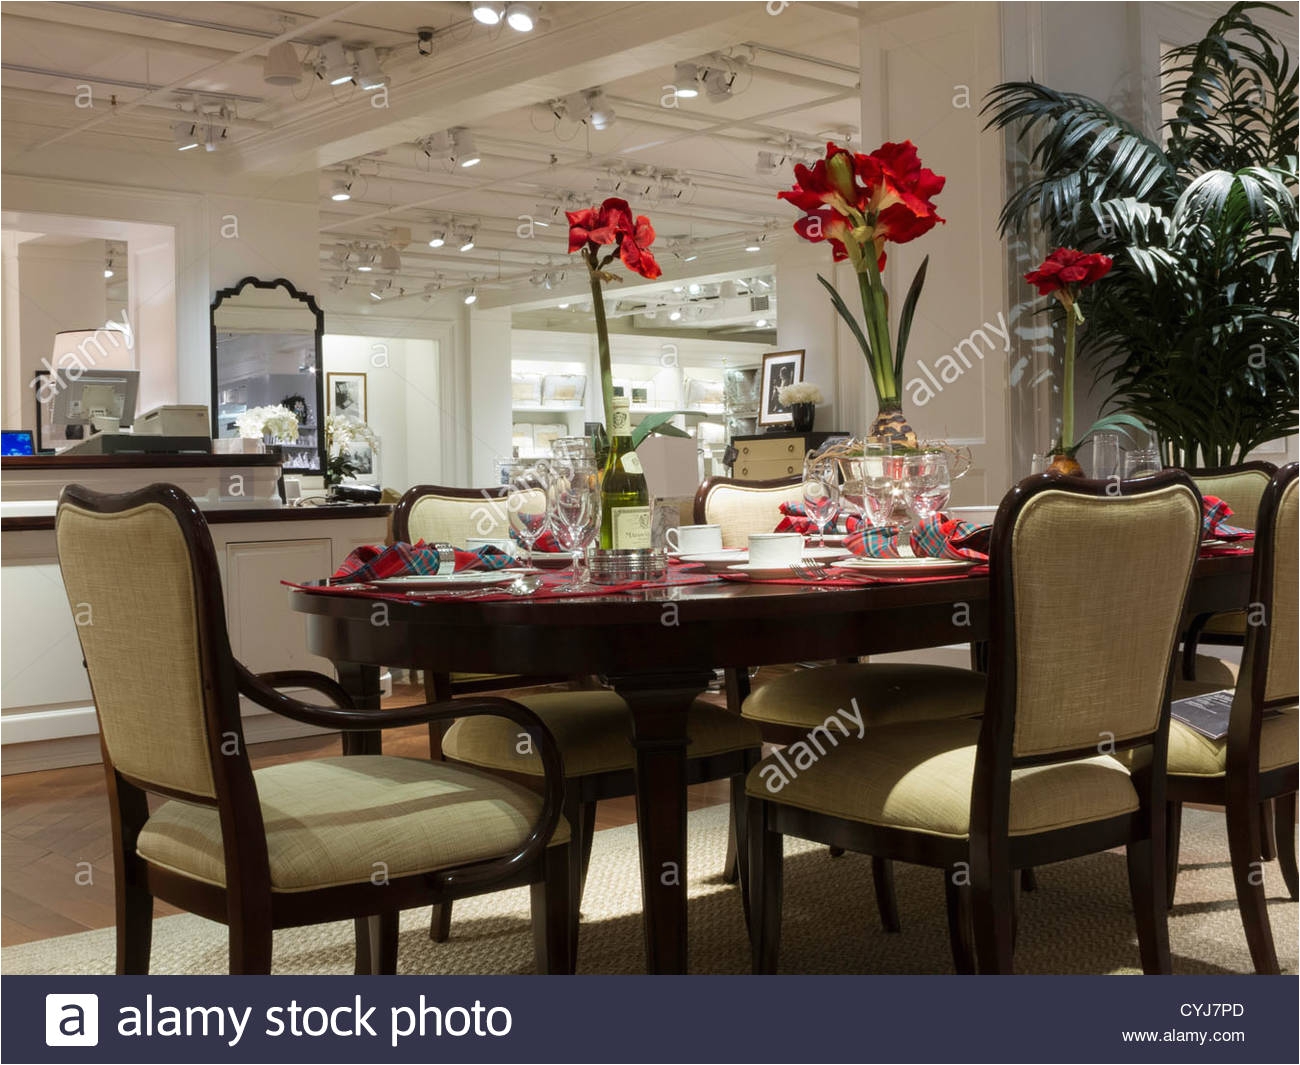 lord taylor home department display flagship store 424 fifth avenue nyc